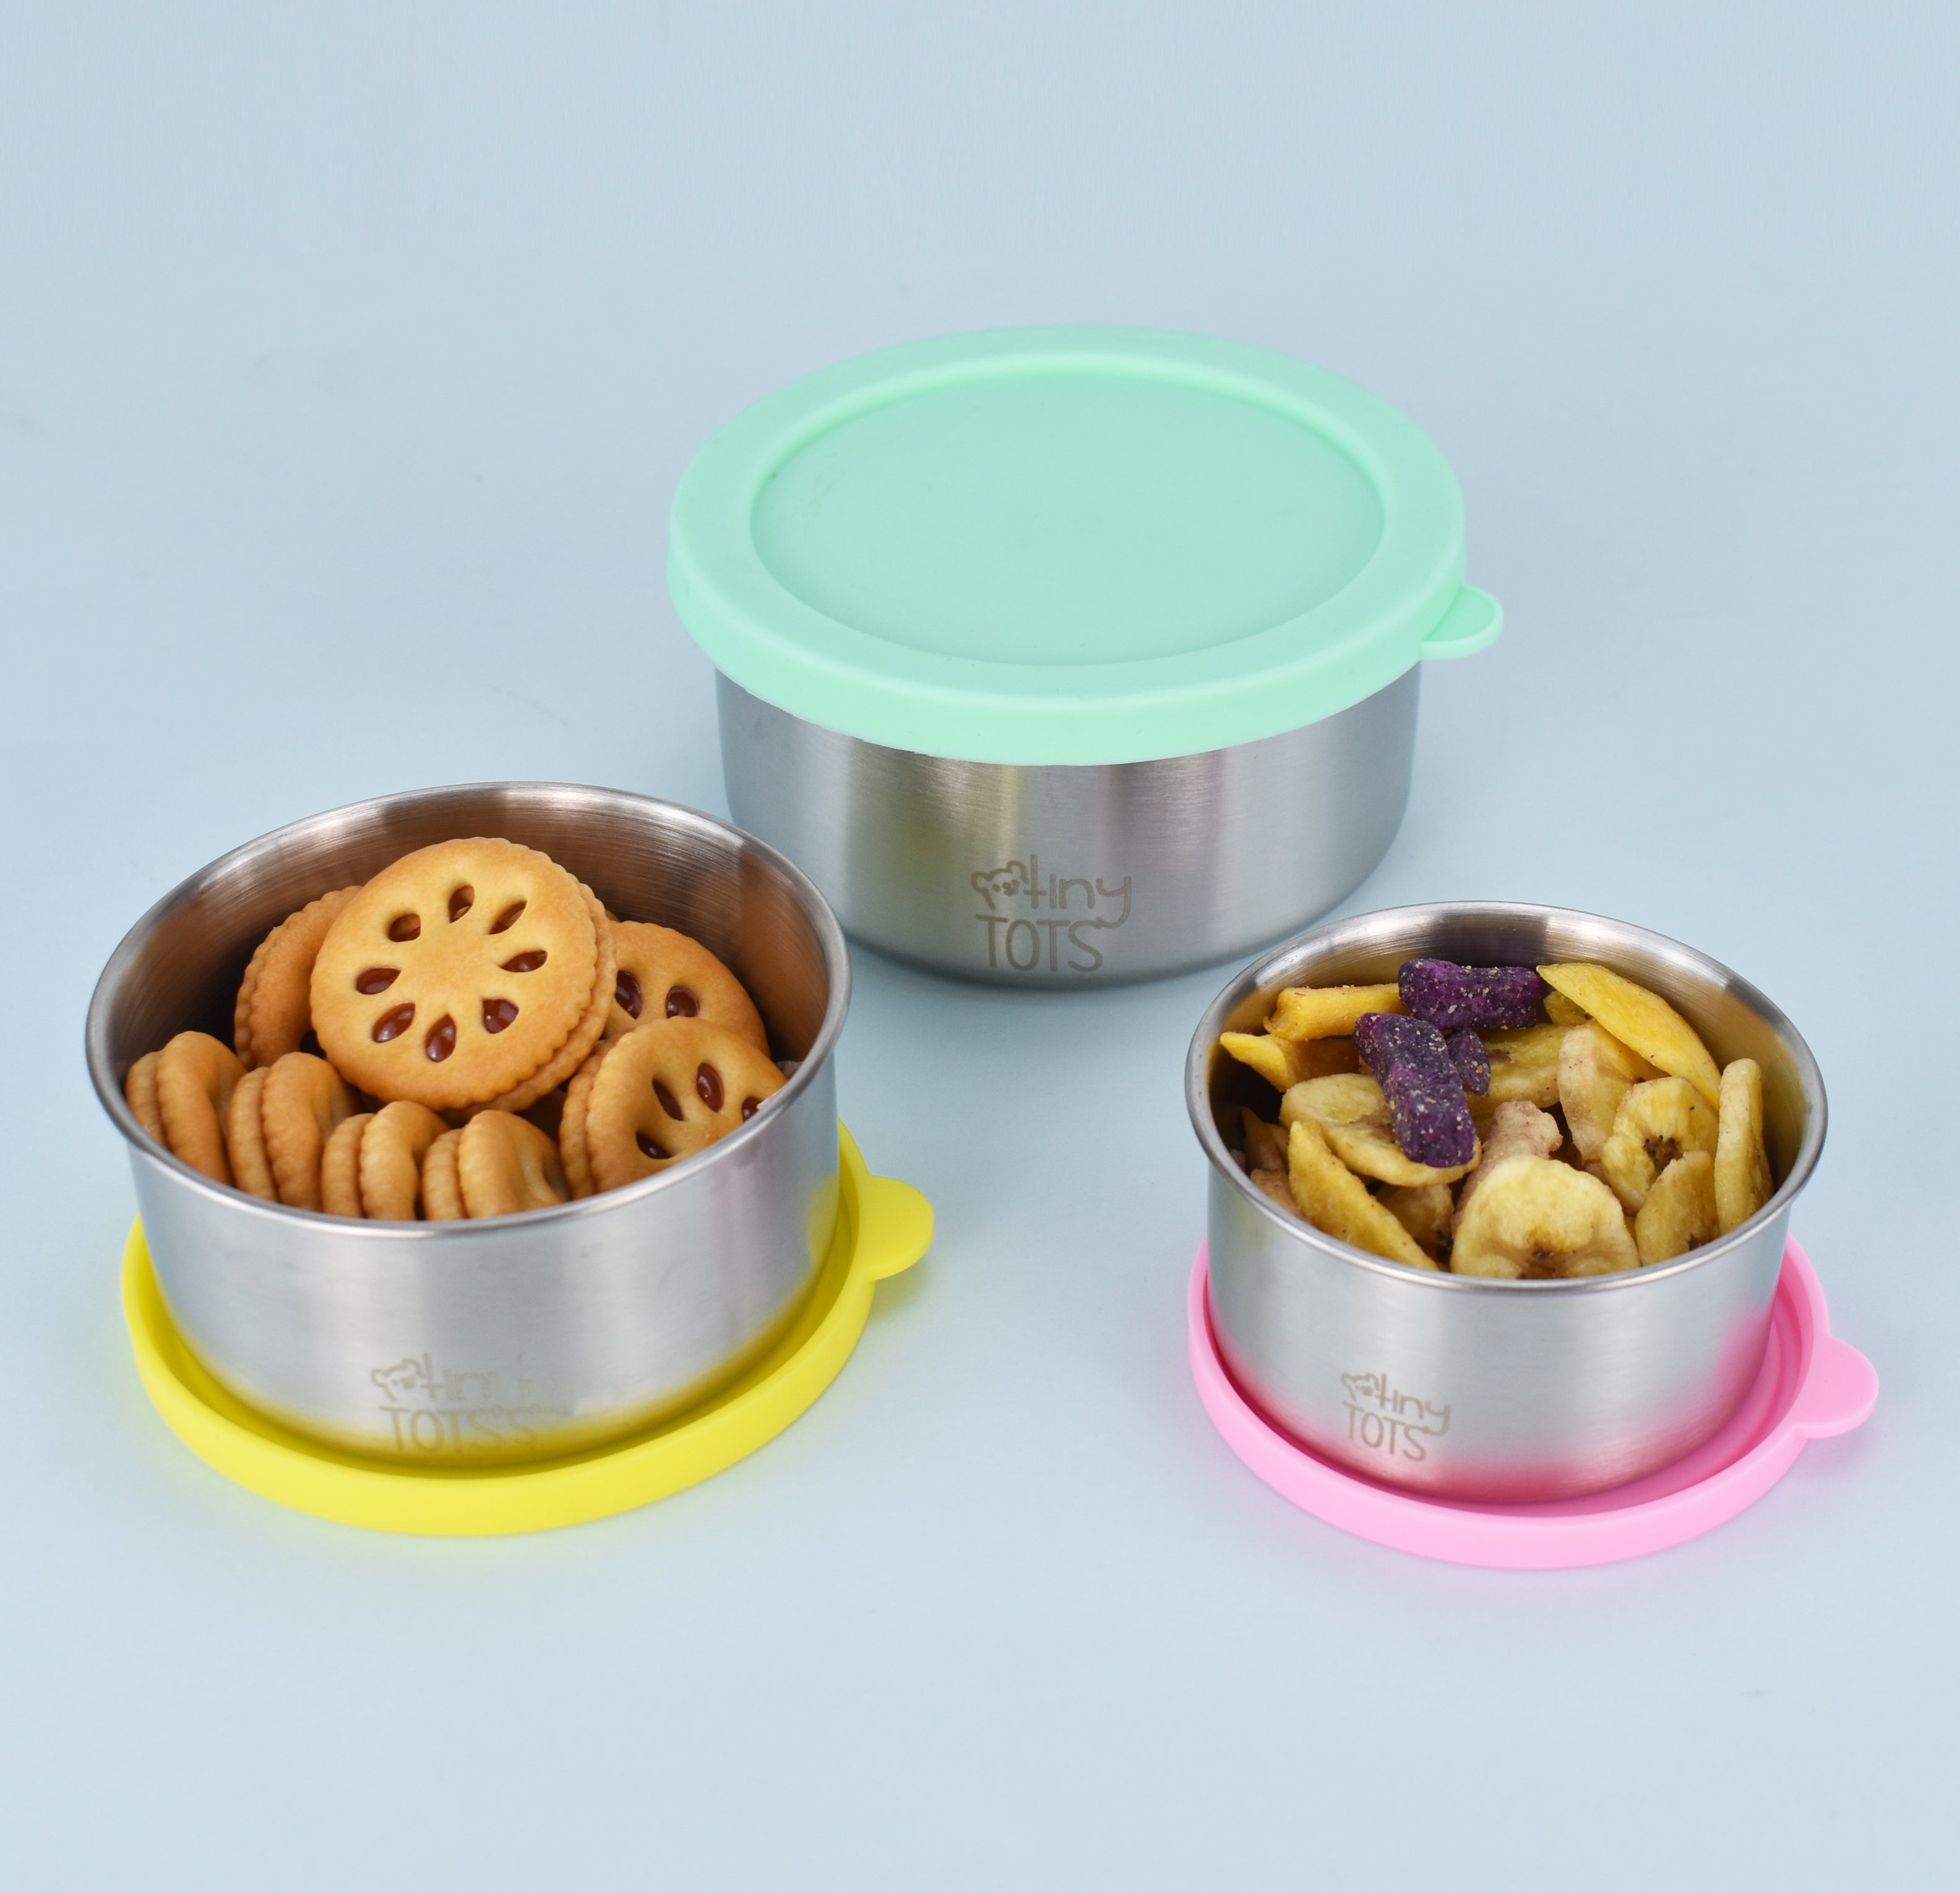 Homotte Stainless Steel Containers with Lids, Stackable Snack